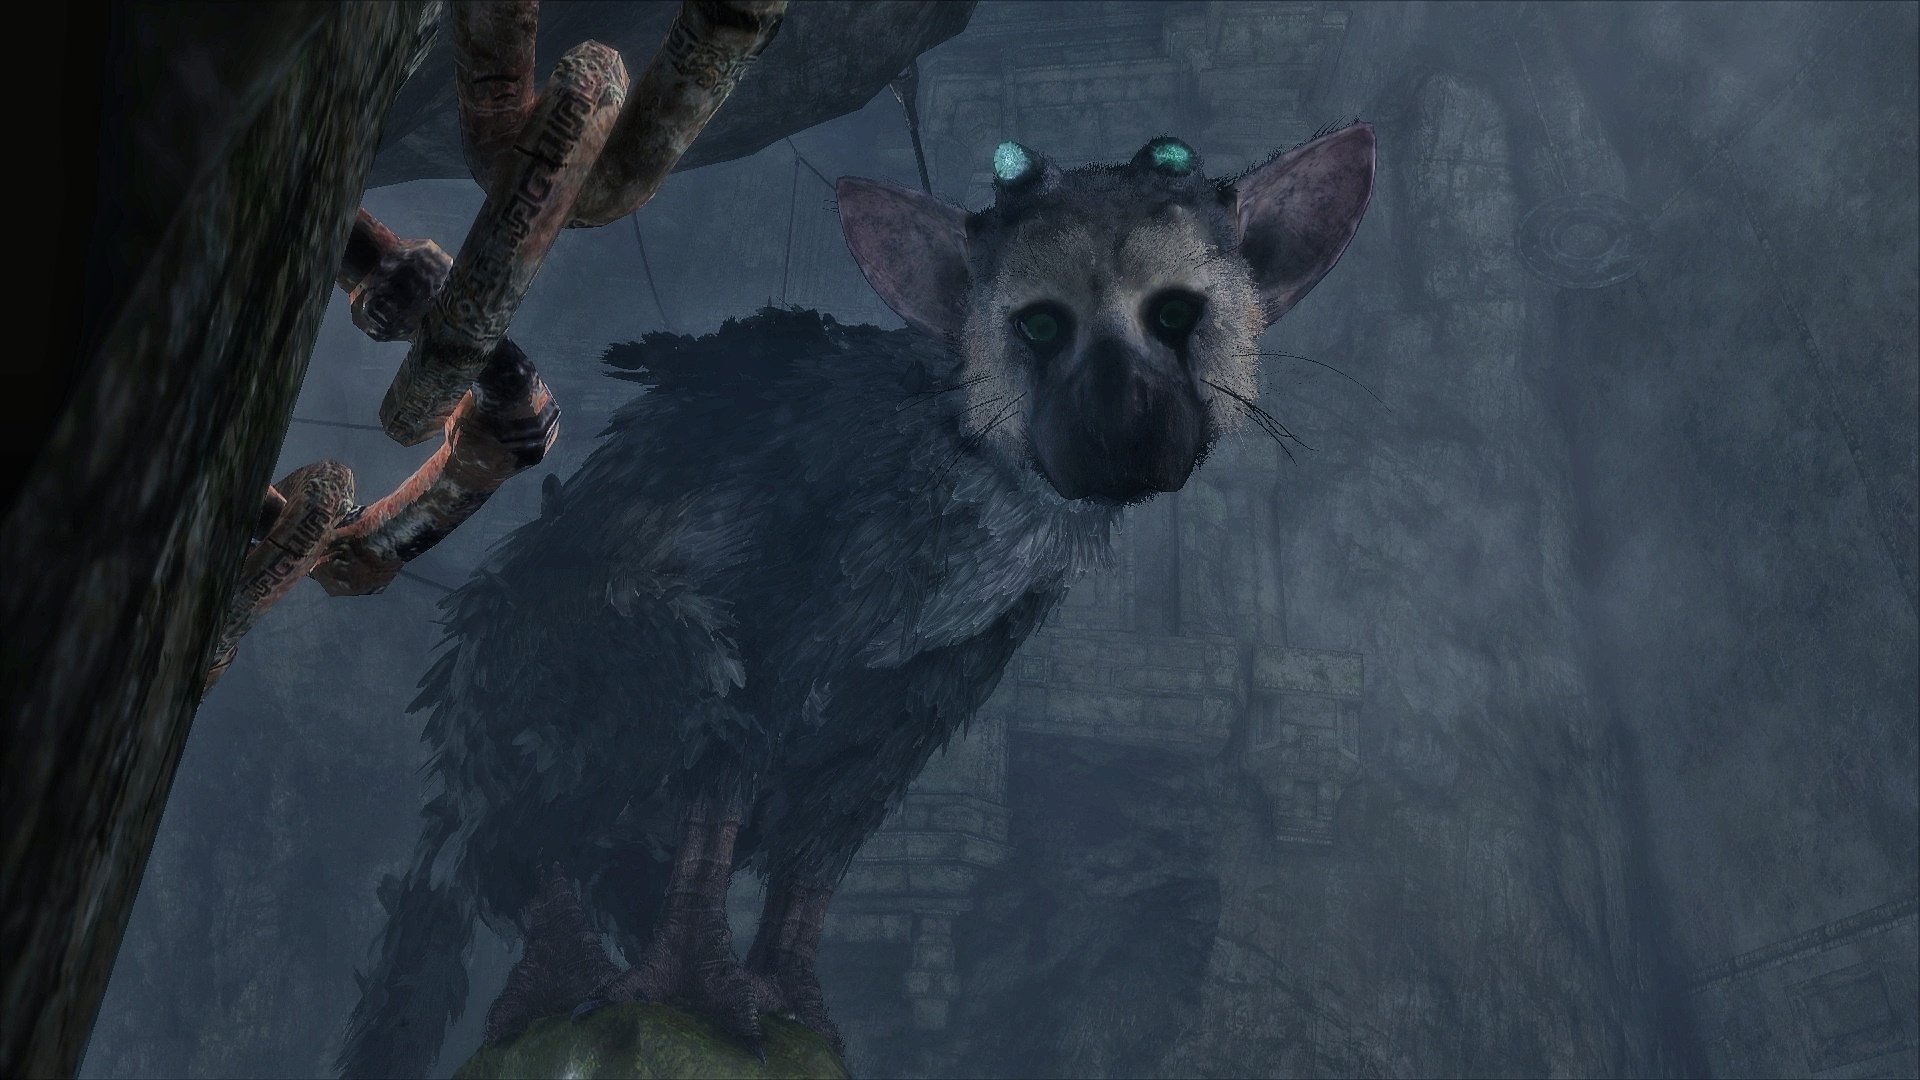 The Last Guardian - #TheQGameCollection #GamingOnTikTok #VideoGames #G